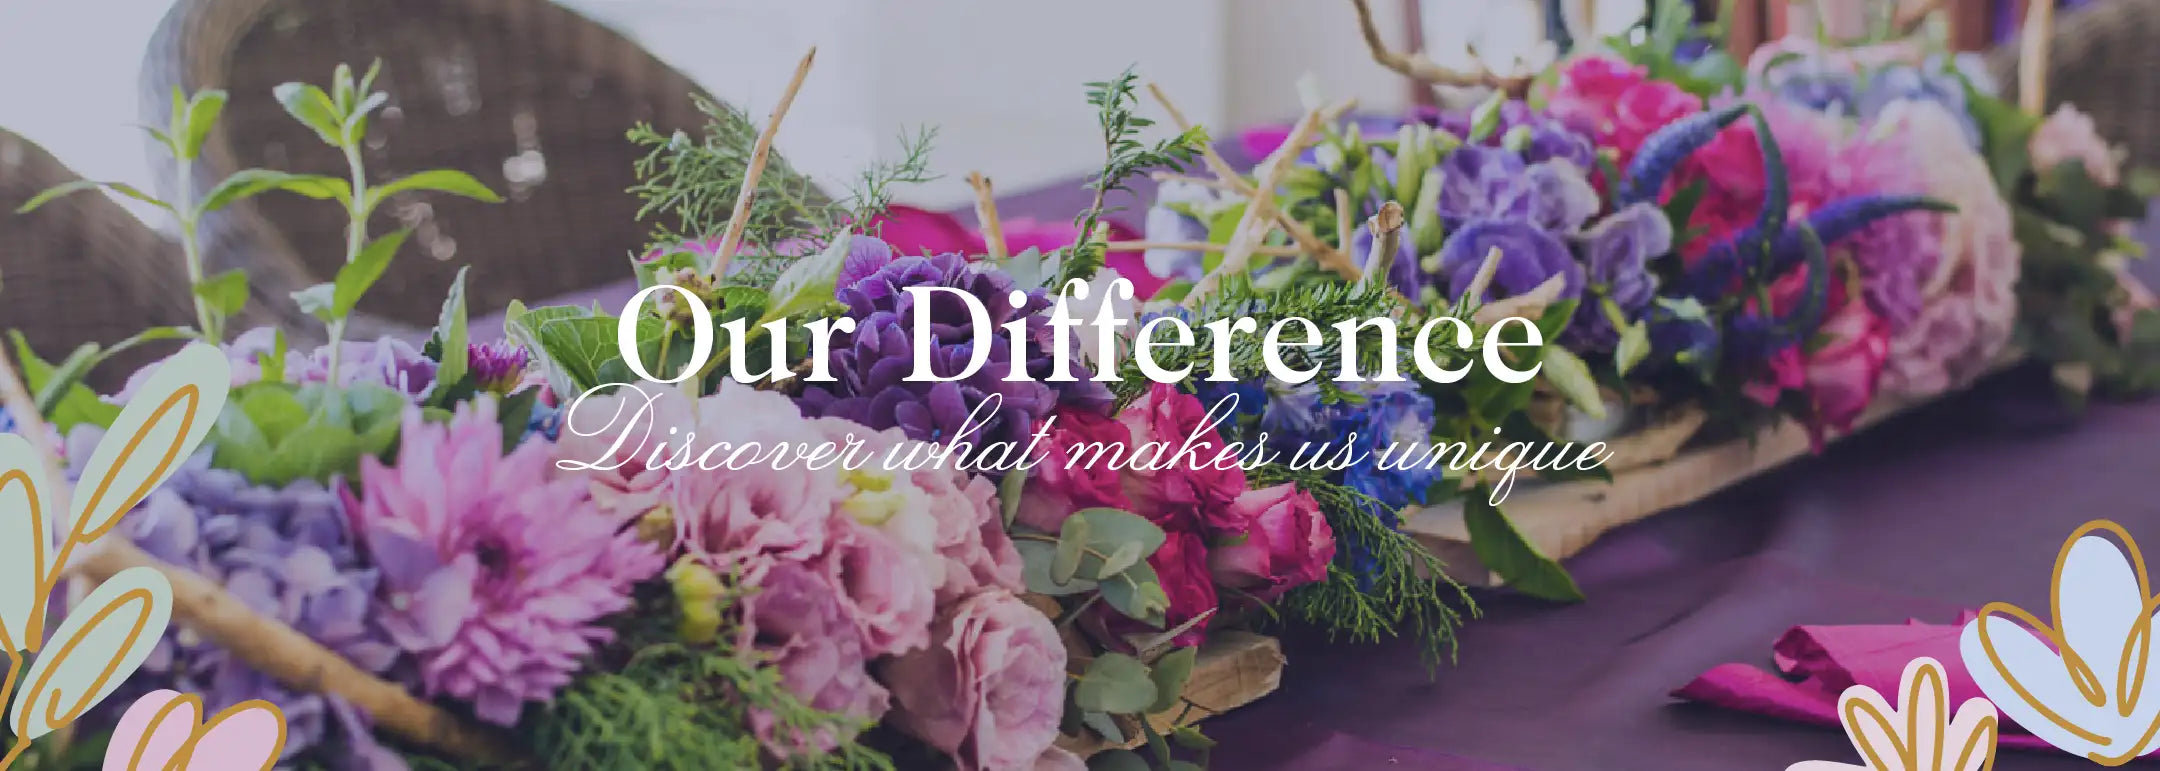 Close-up of a vibrant floral arrangement featuring pink, purple, and green flowers with the text 'Our Difference, Discover what makes us unique.' Our Difference. Fabulous Flowers and Gifts.